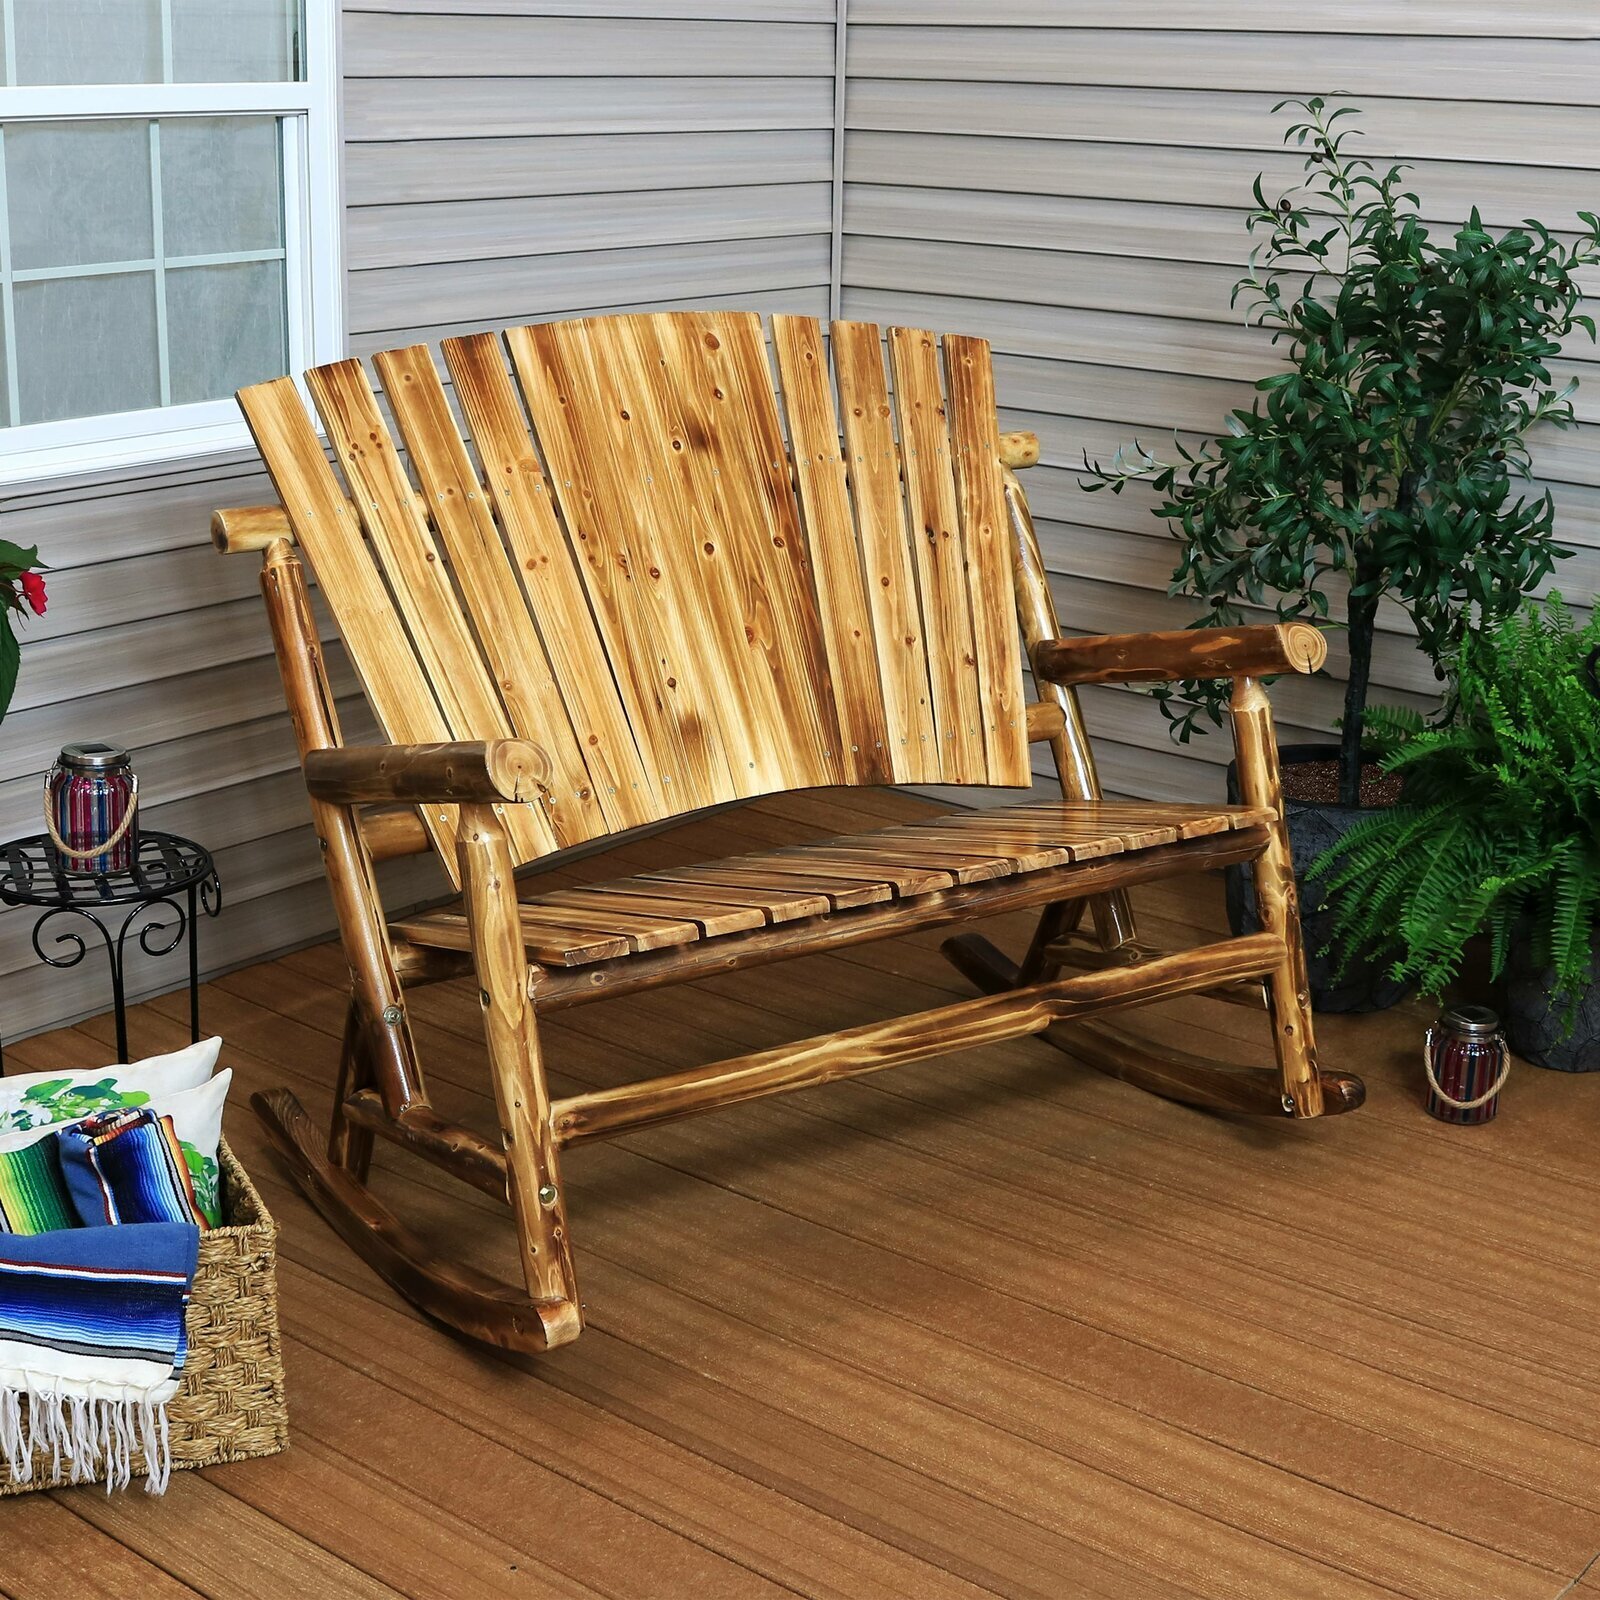 Every Front Patios Dream: Rustic Wooden Rocking Chair Bench